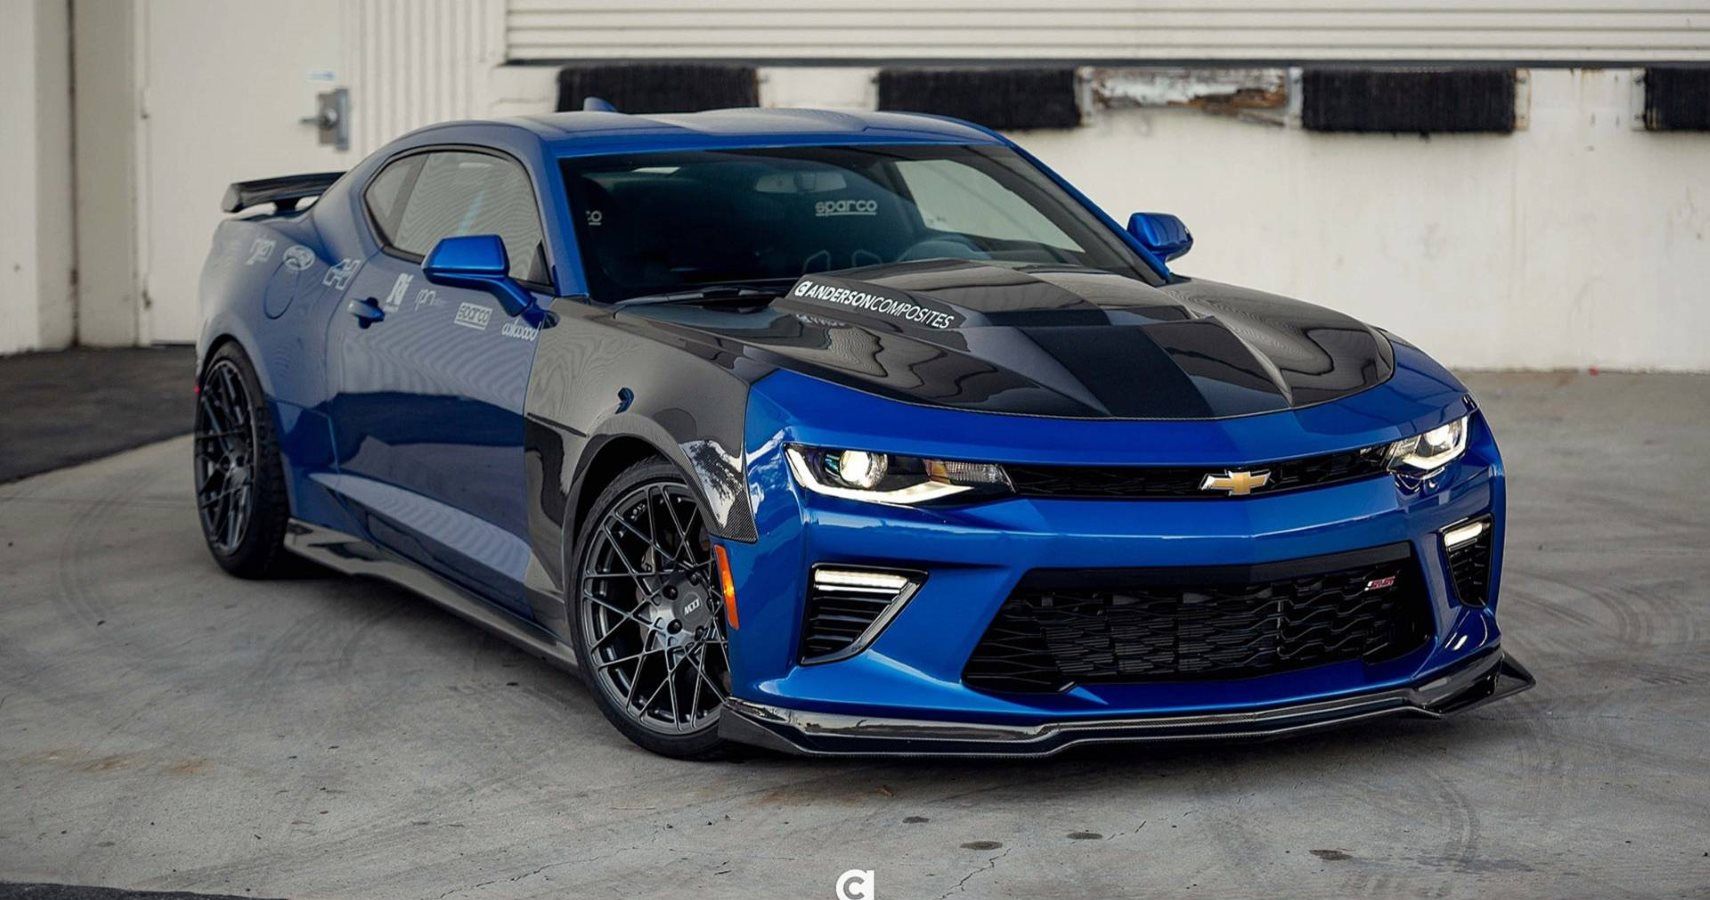 Anderson Composites Modifies Camaro SS With Carbon Fiber Body